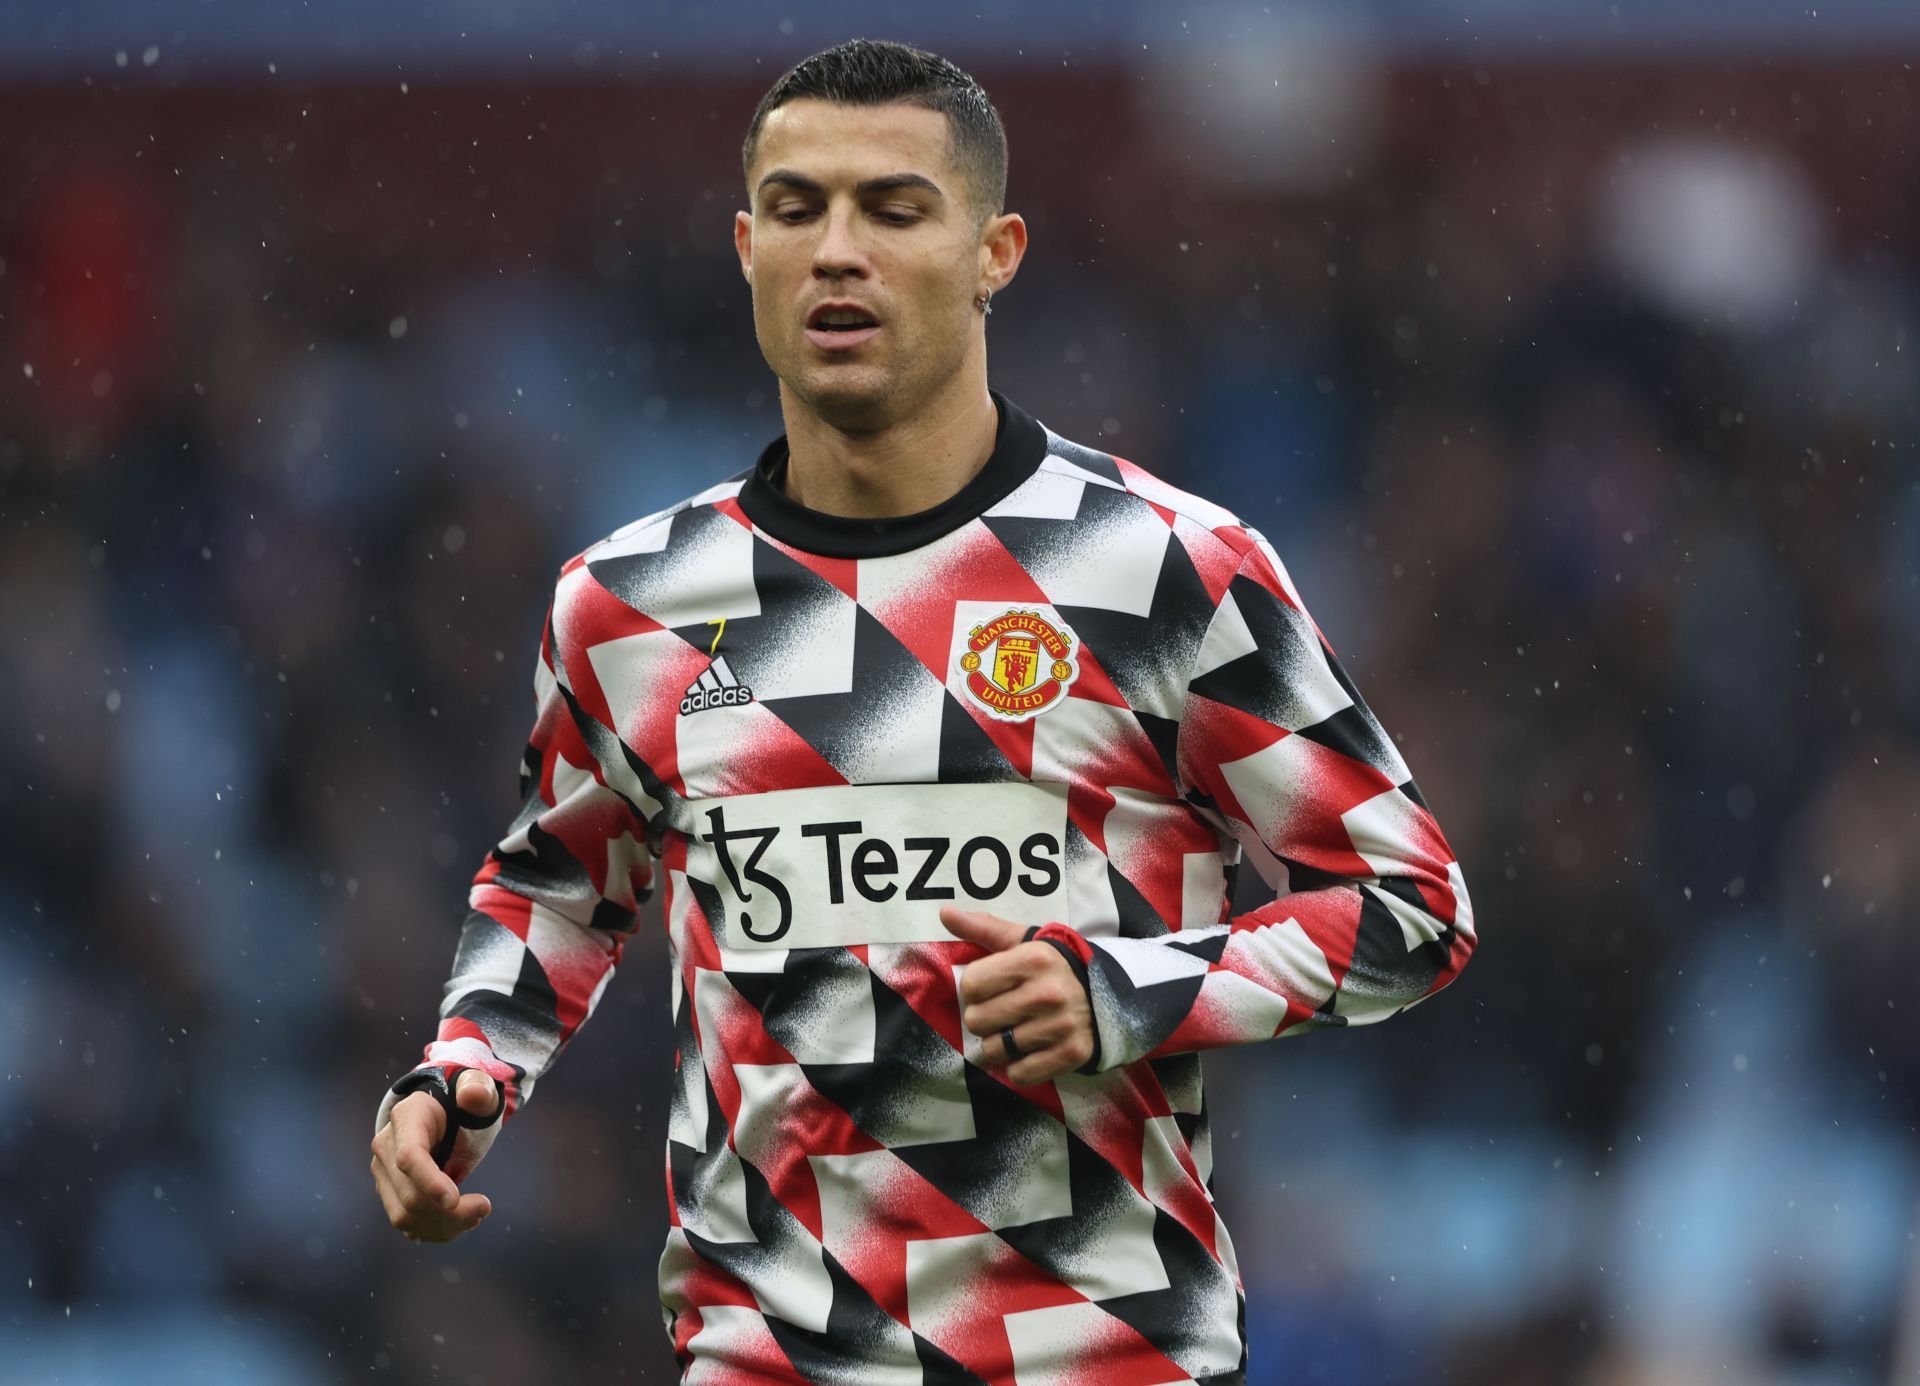 Cristiano Ronaldo has endured a difficult time at Old Trafford this season.